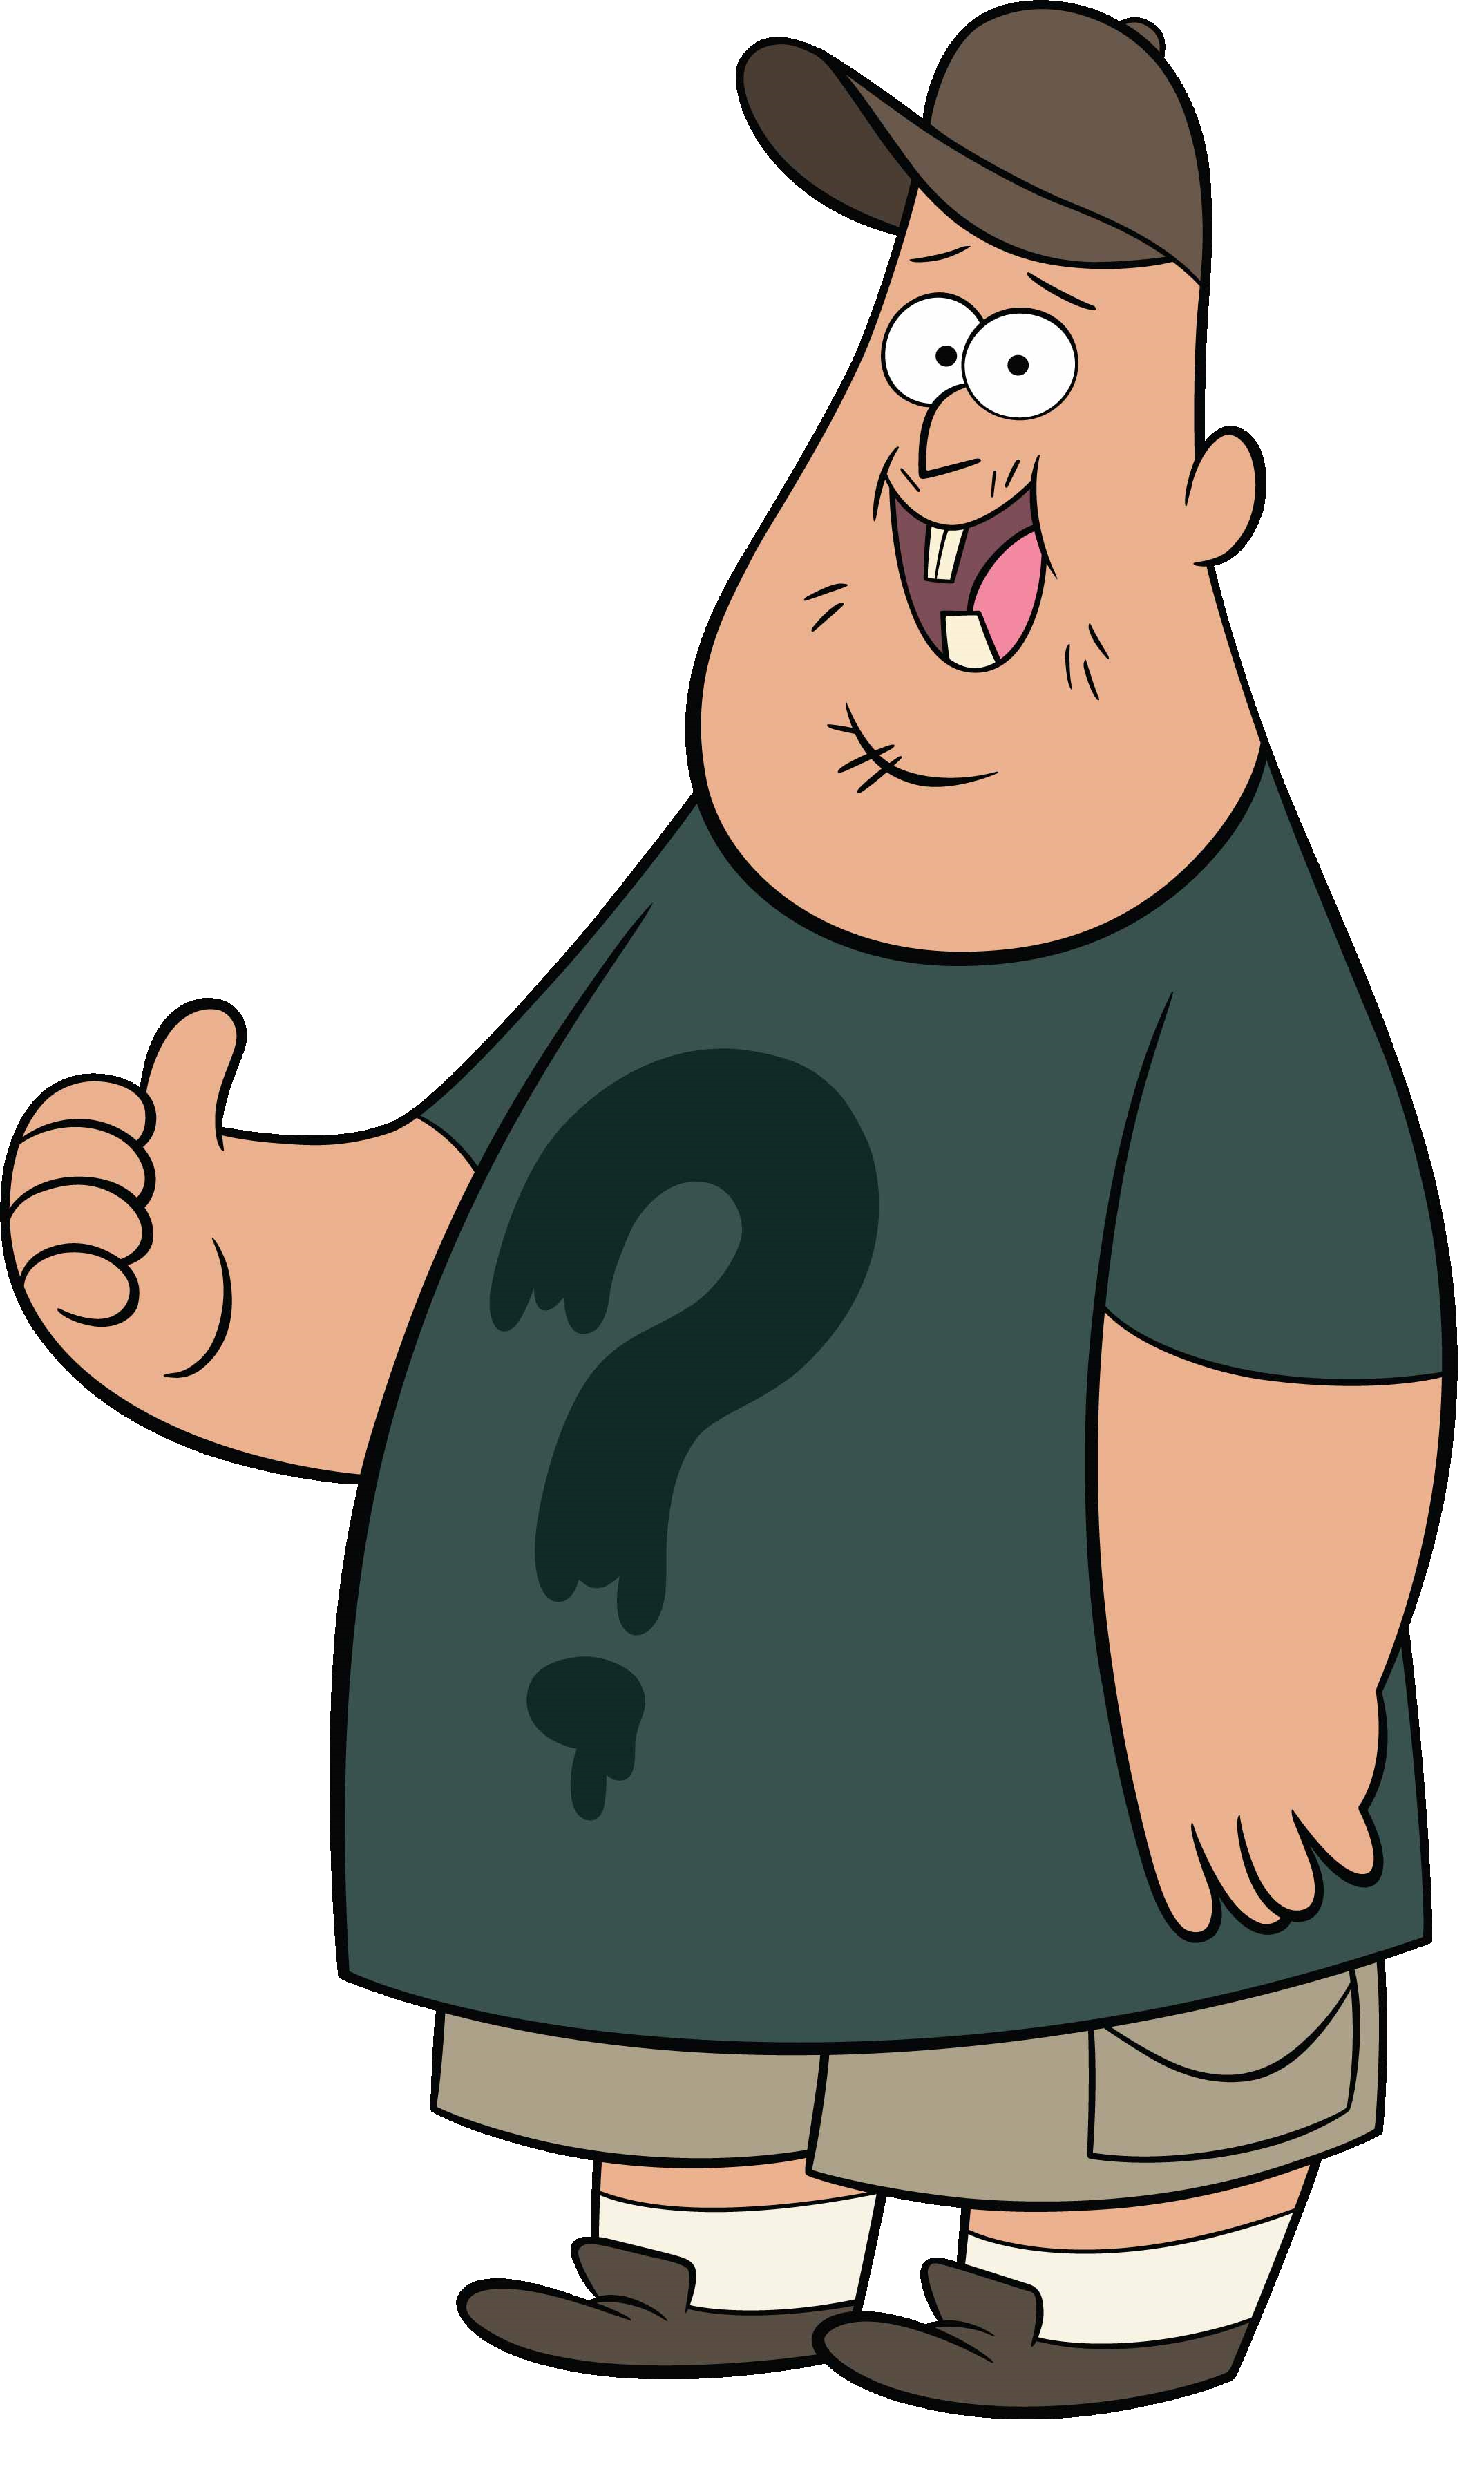 Soos_appearance.png